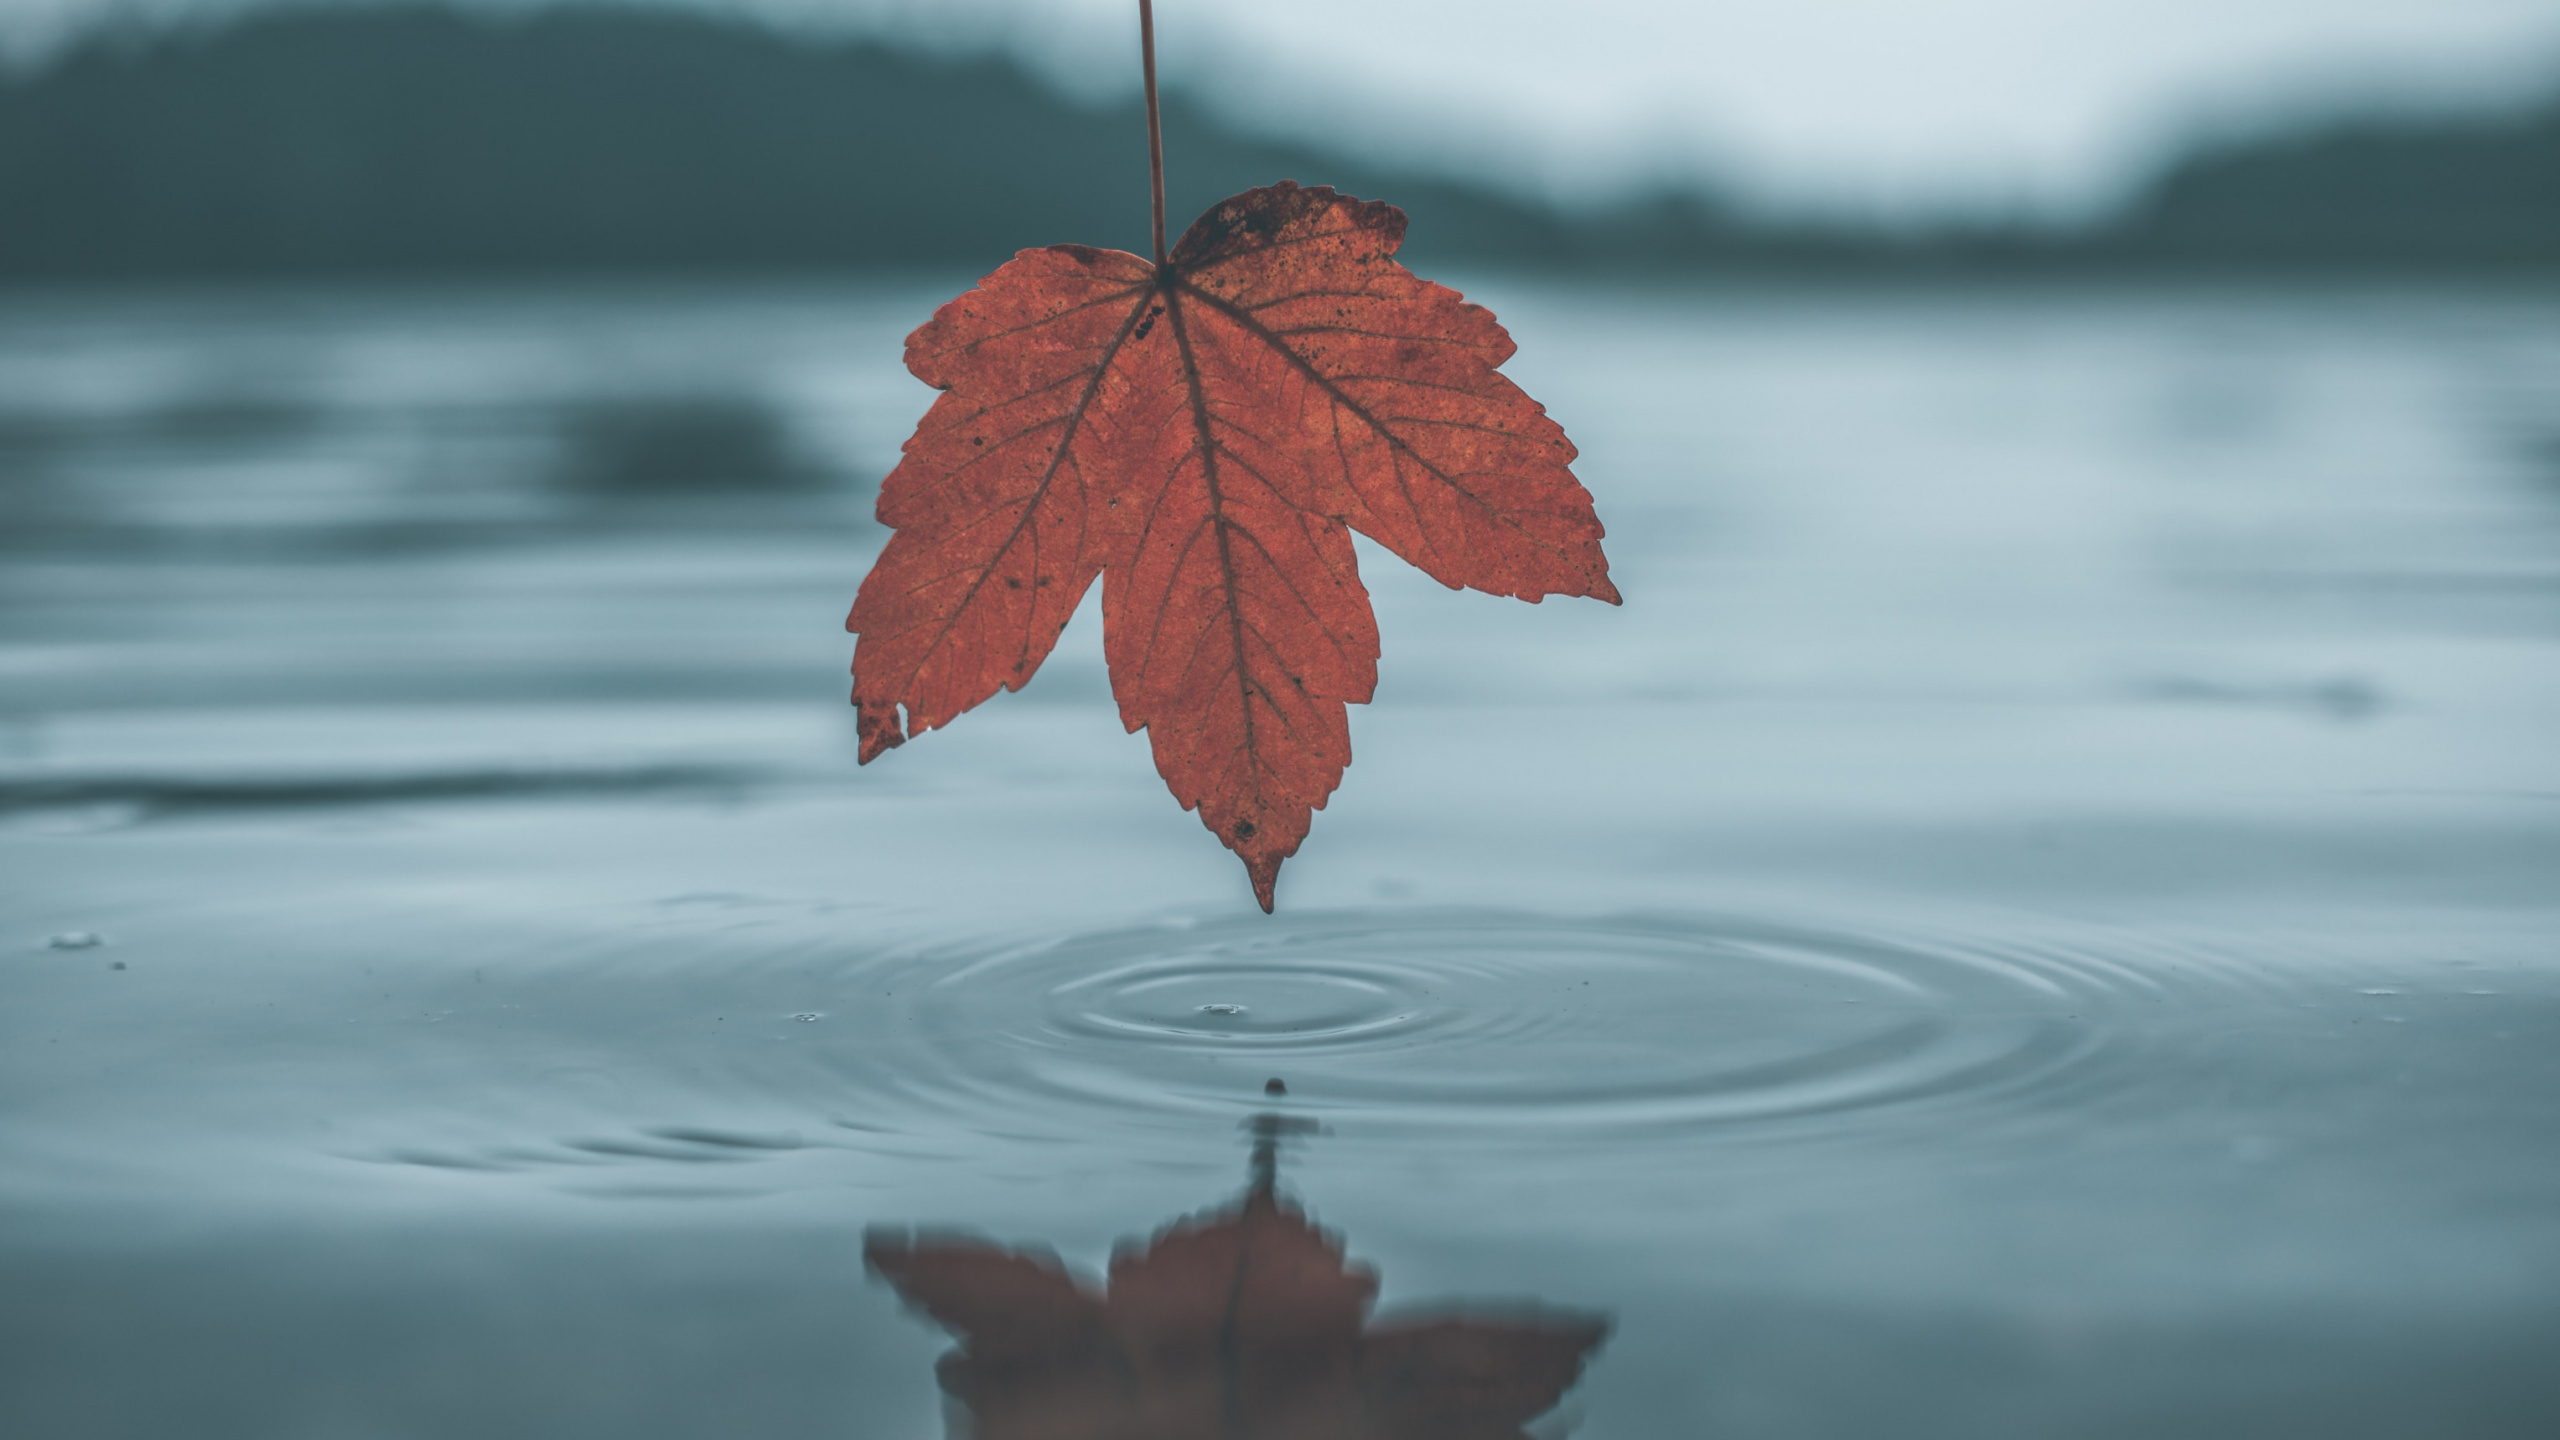 Leaf, Water, Tree, Reflection, Red. Wallpaper in 2560x1440 Resolution